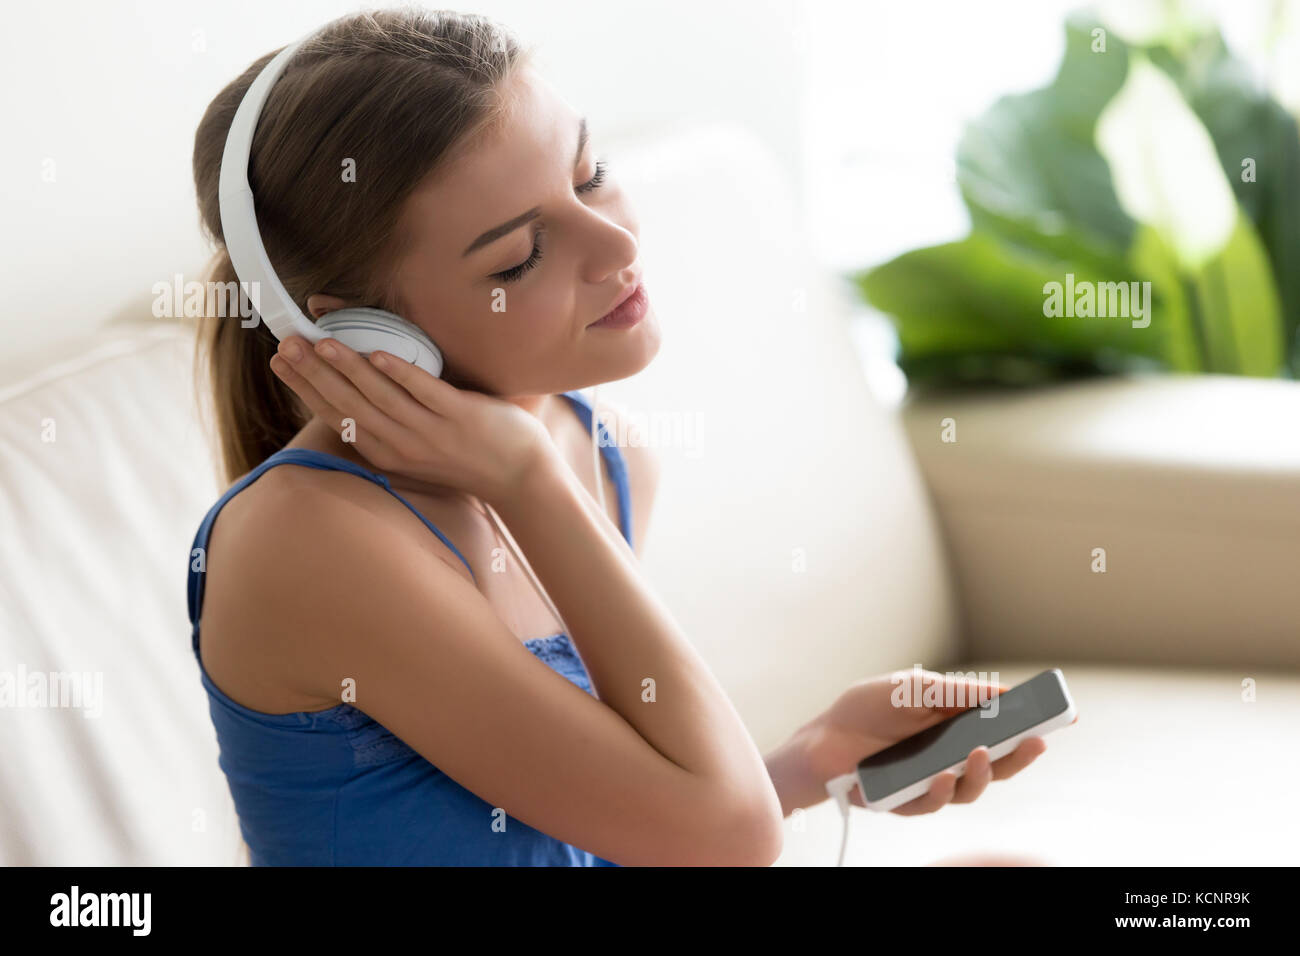 Relaxed calm young woman enjoys music, teenager wearing headphones listens to high quality sound using player application on smartphone, teen girl med Stock Photo